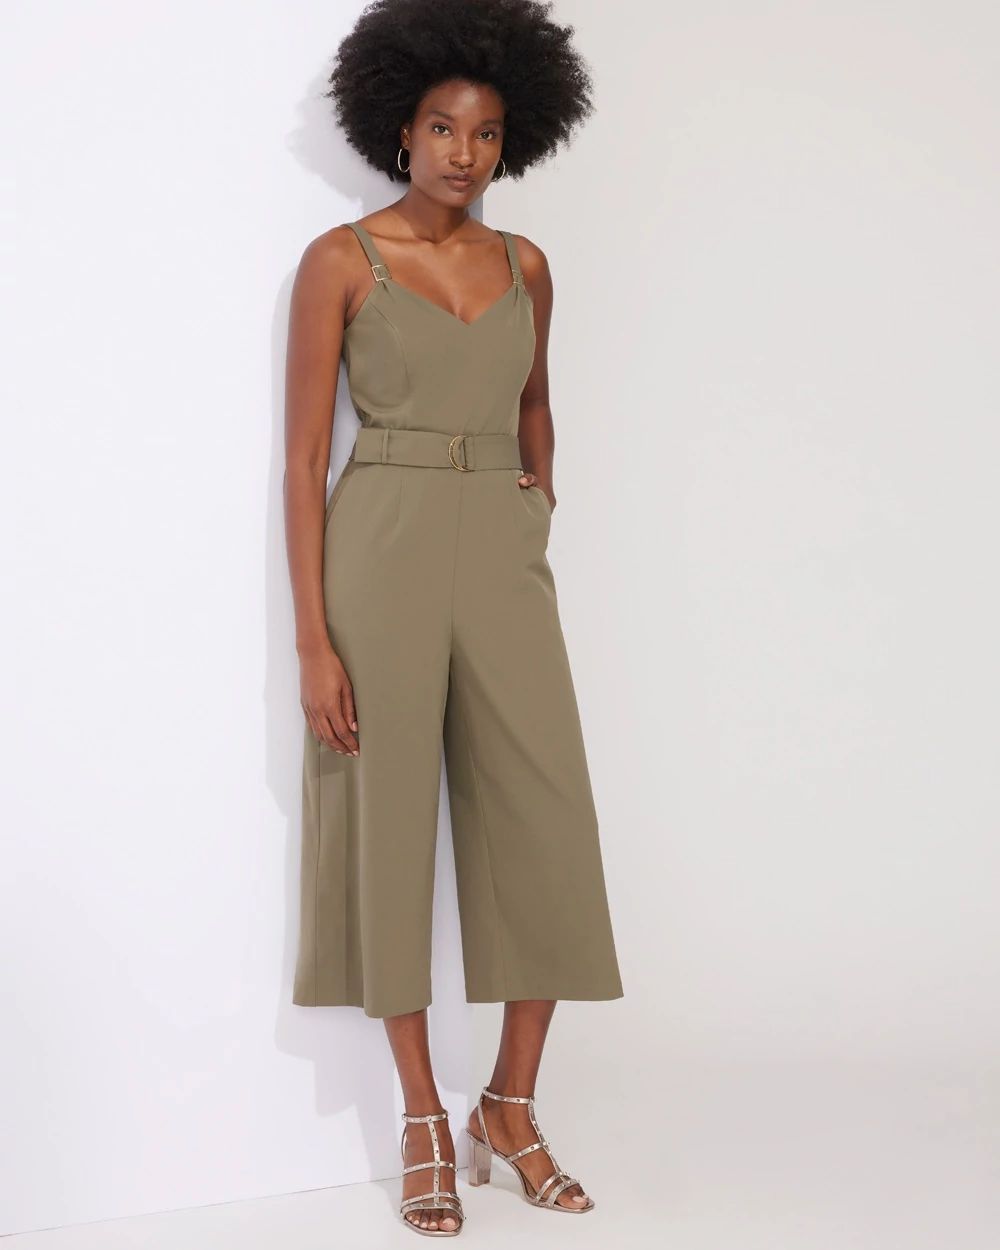 Outlet WHBM Sleeveless Crepe Jumpsuit click to view larger image.